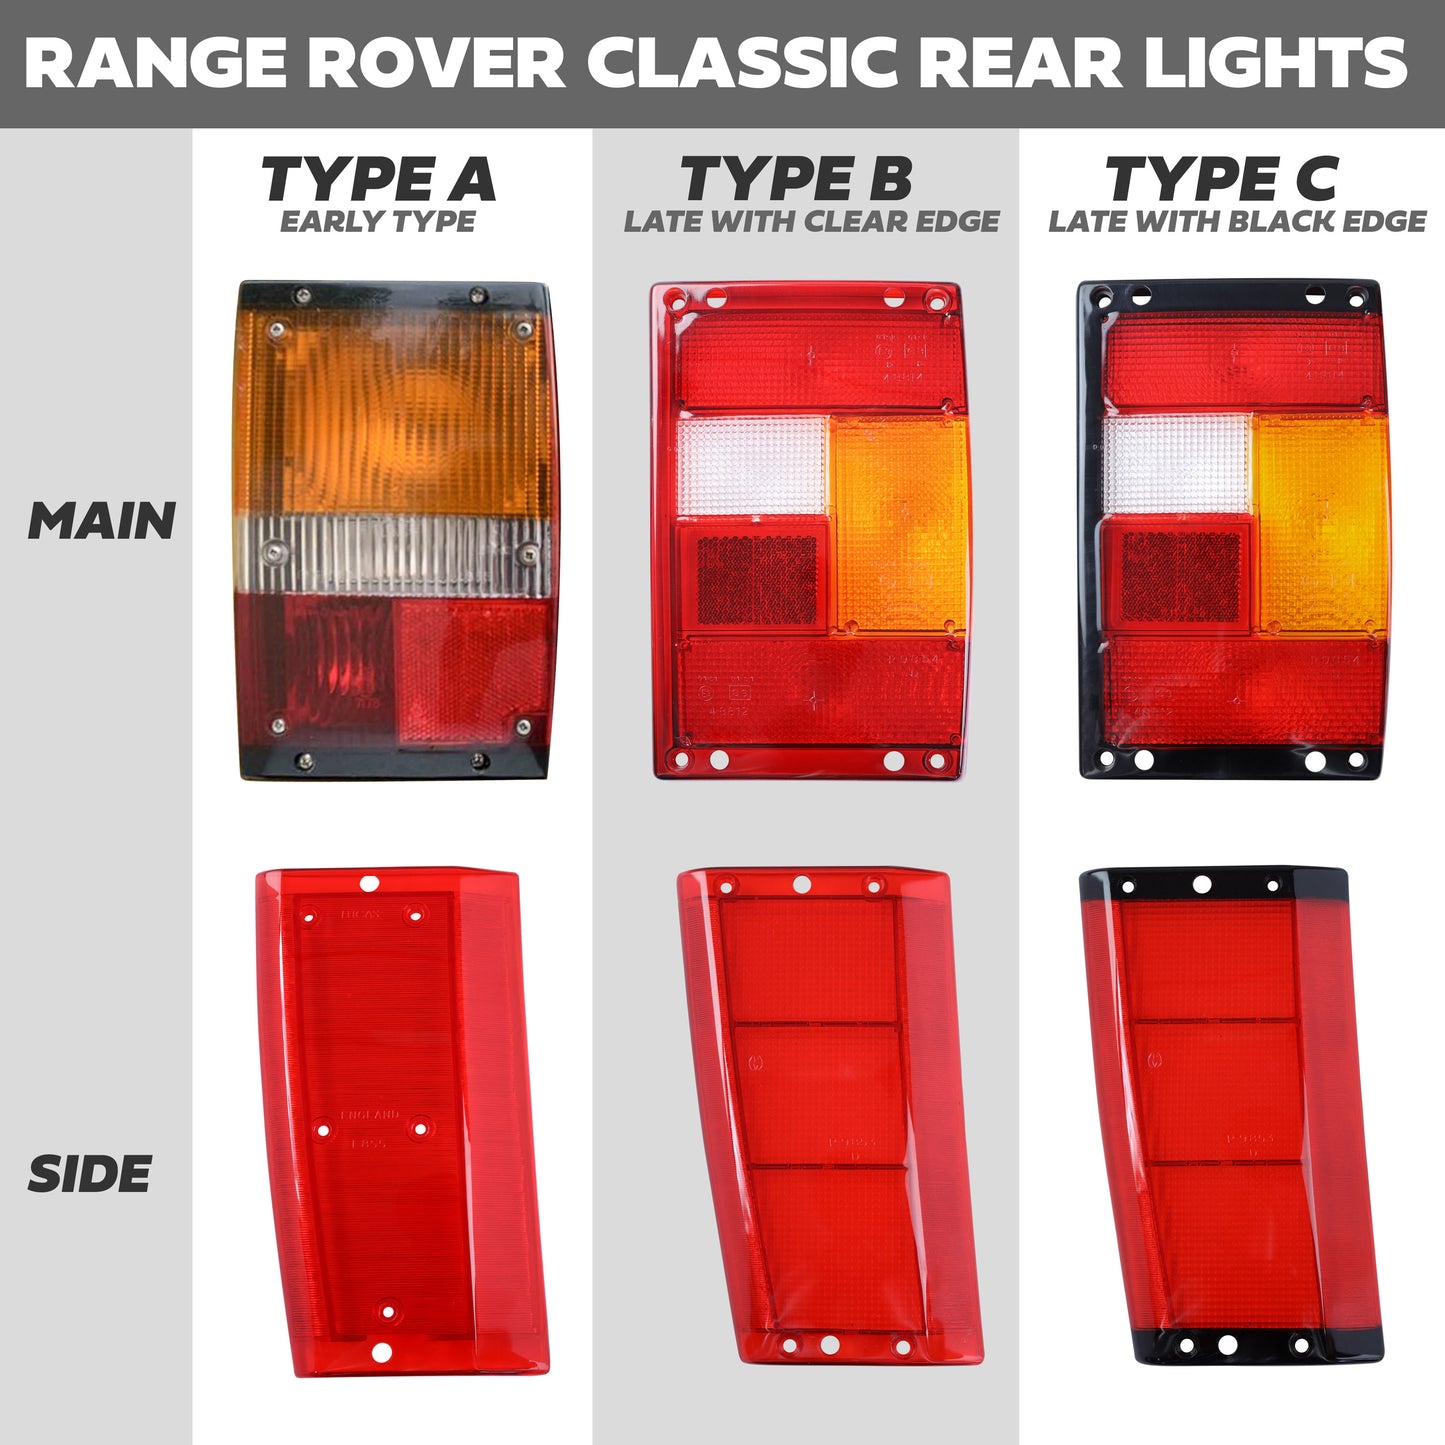 Rear Light Lens for Range Rover Classic - Side Section - Clear Edge - Right Side